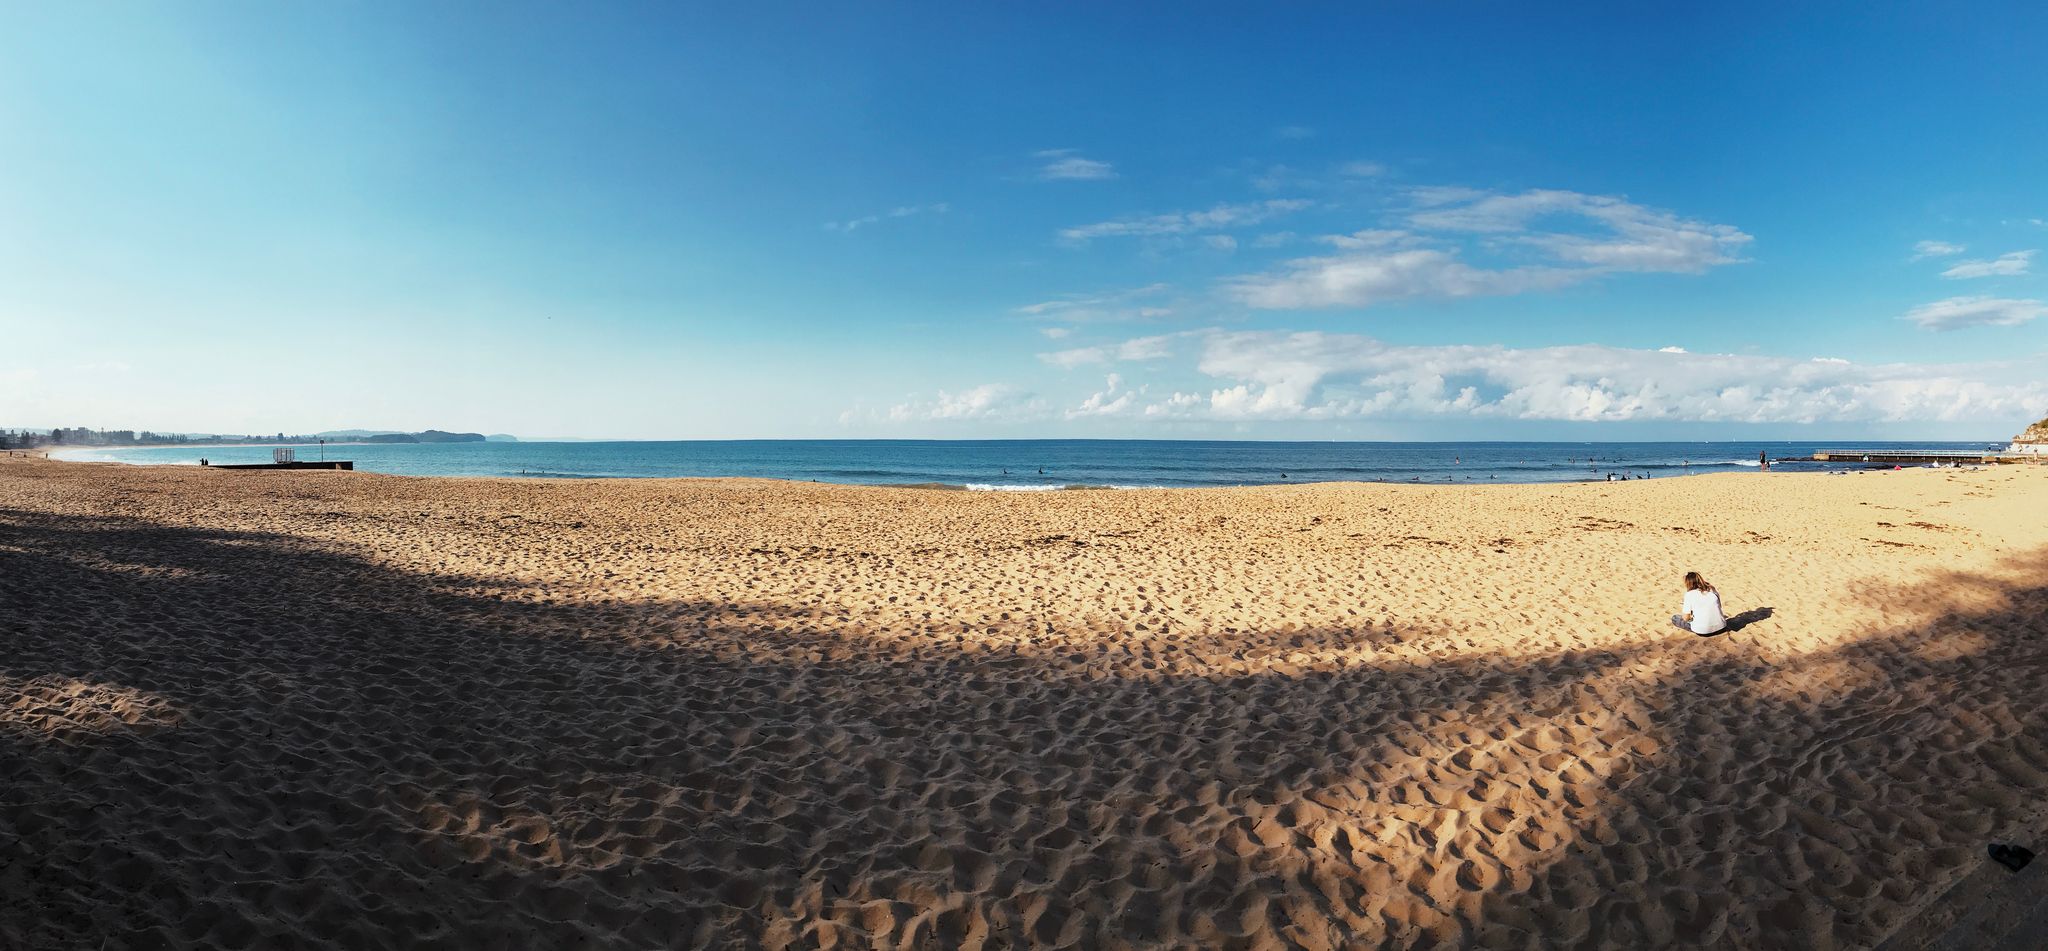 A panorama photo of a yellow sandy beach, blue ocean past it, and some clouds towards the horizon in an otherwise blue sky.